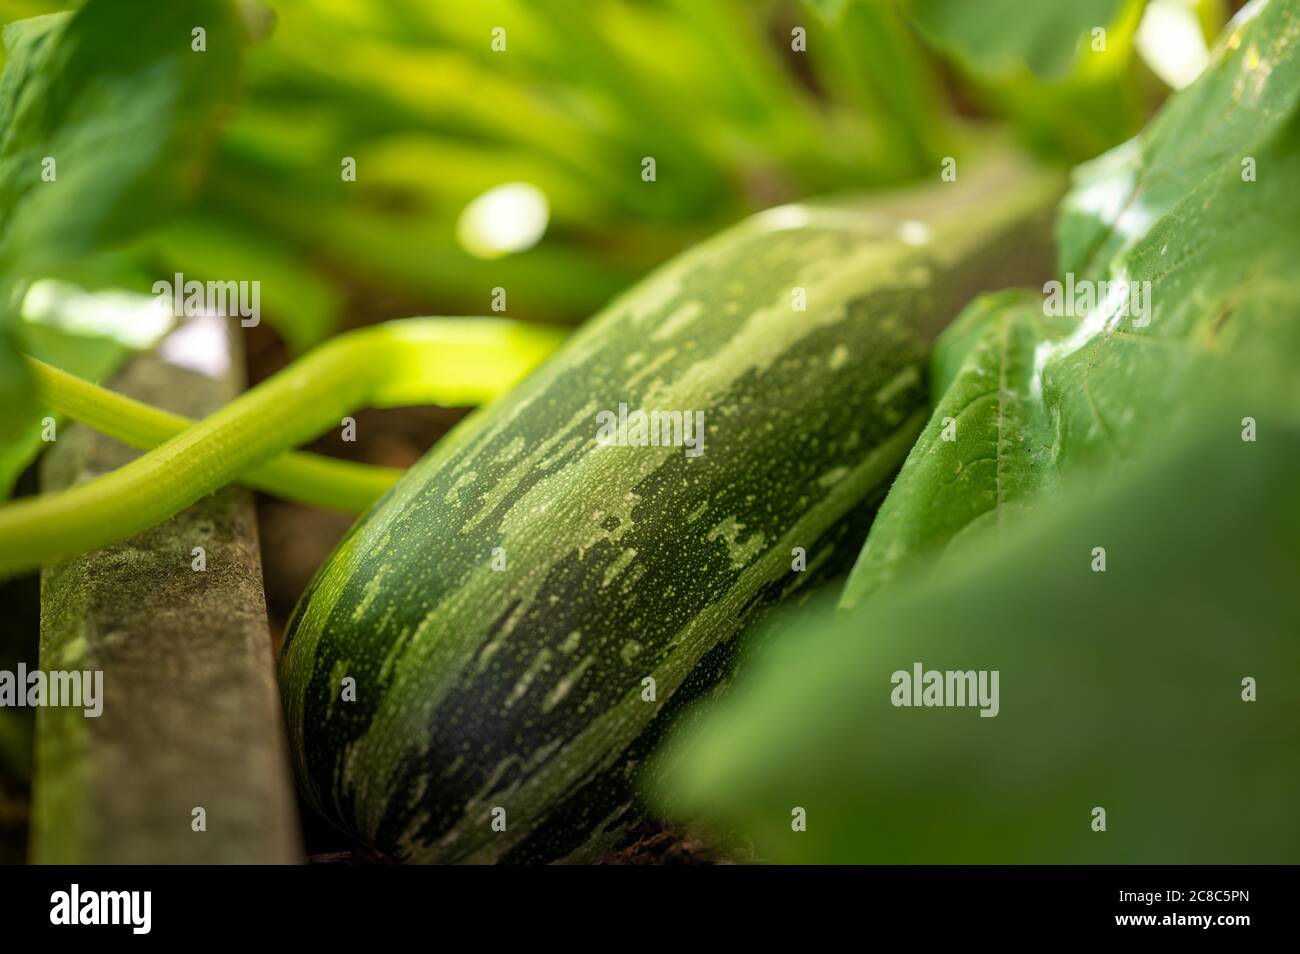 A Zucchini grown in the own garden. Stock Photo